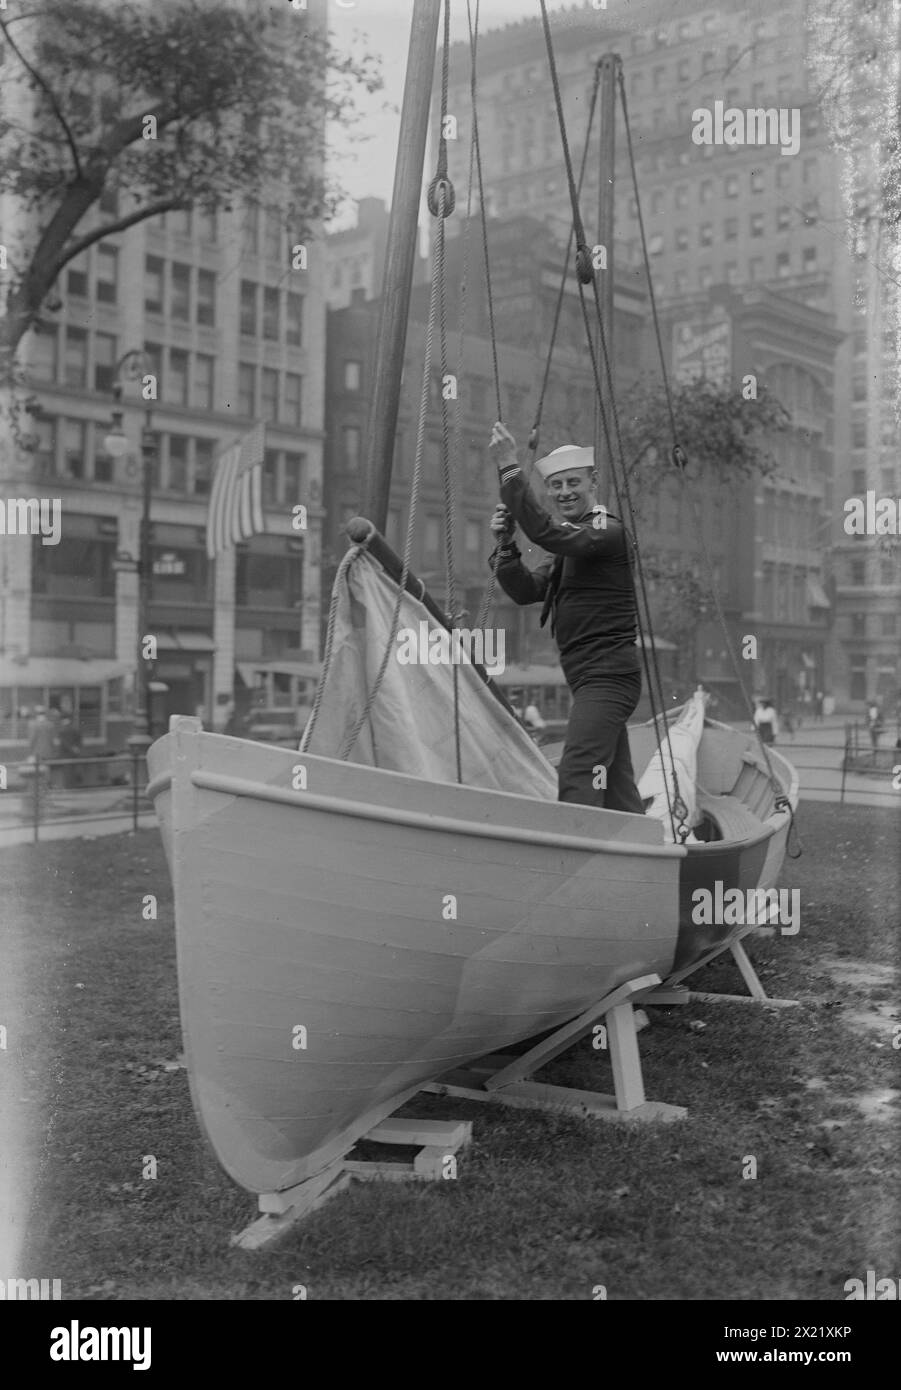 W.J. Reilly, 1917 or 1918. William J. Reilly, a sergeant in the Navy and a vaudeville performer, who recorded patriotic songs as &quot;Sailor Reilly&quot;. Reilly is on the USS Recruit, a wooden mockup of a battleship built in Union Square, New York City by the Navy to recruit seamen and sell Liberty Bonds during World War I. Stock Photo